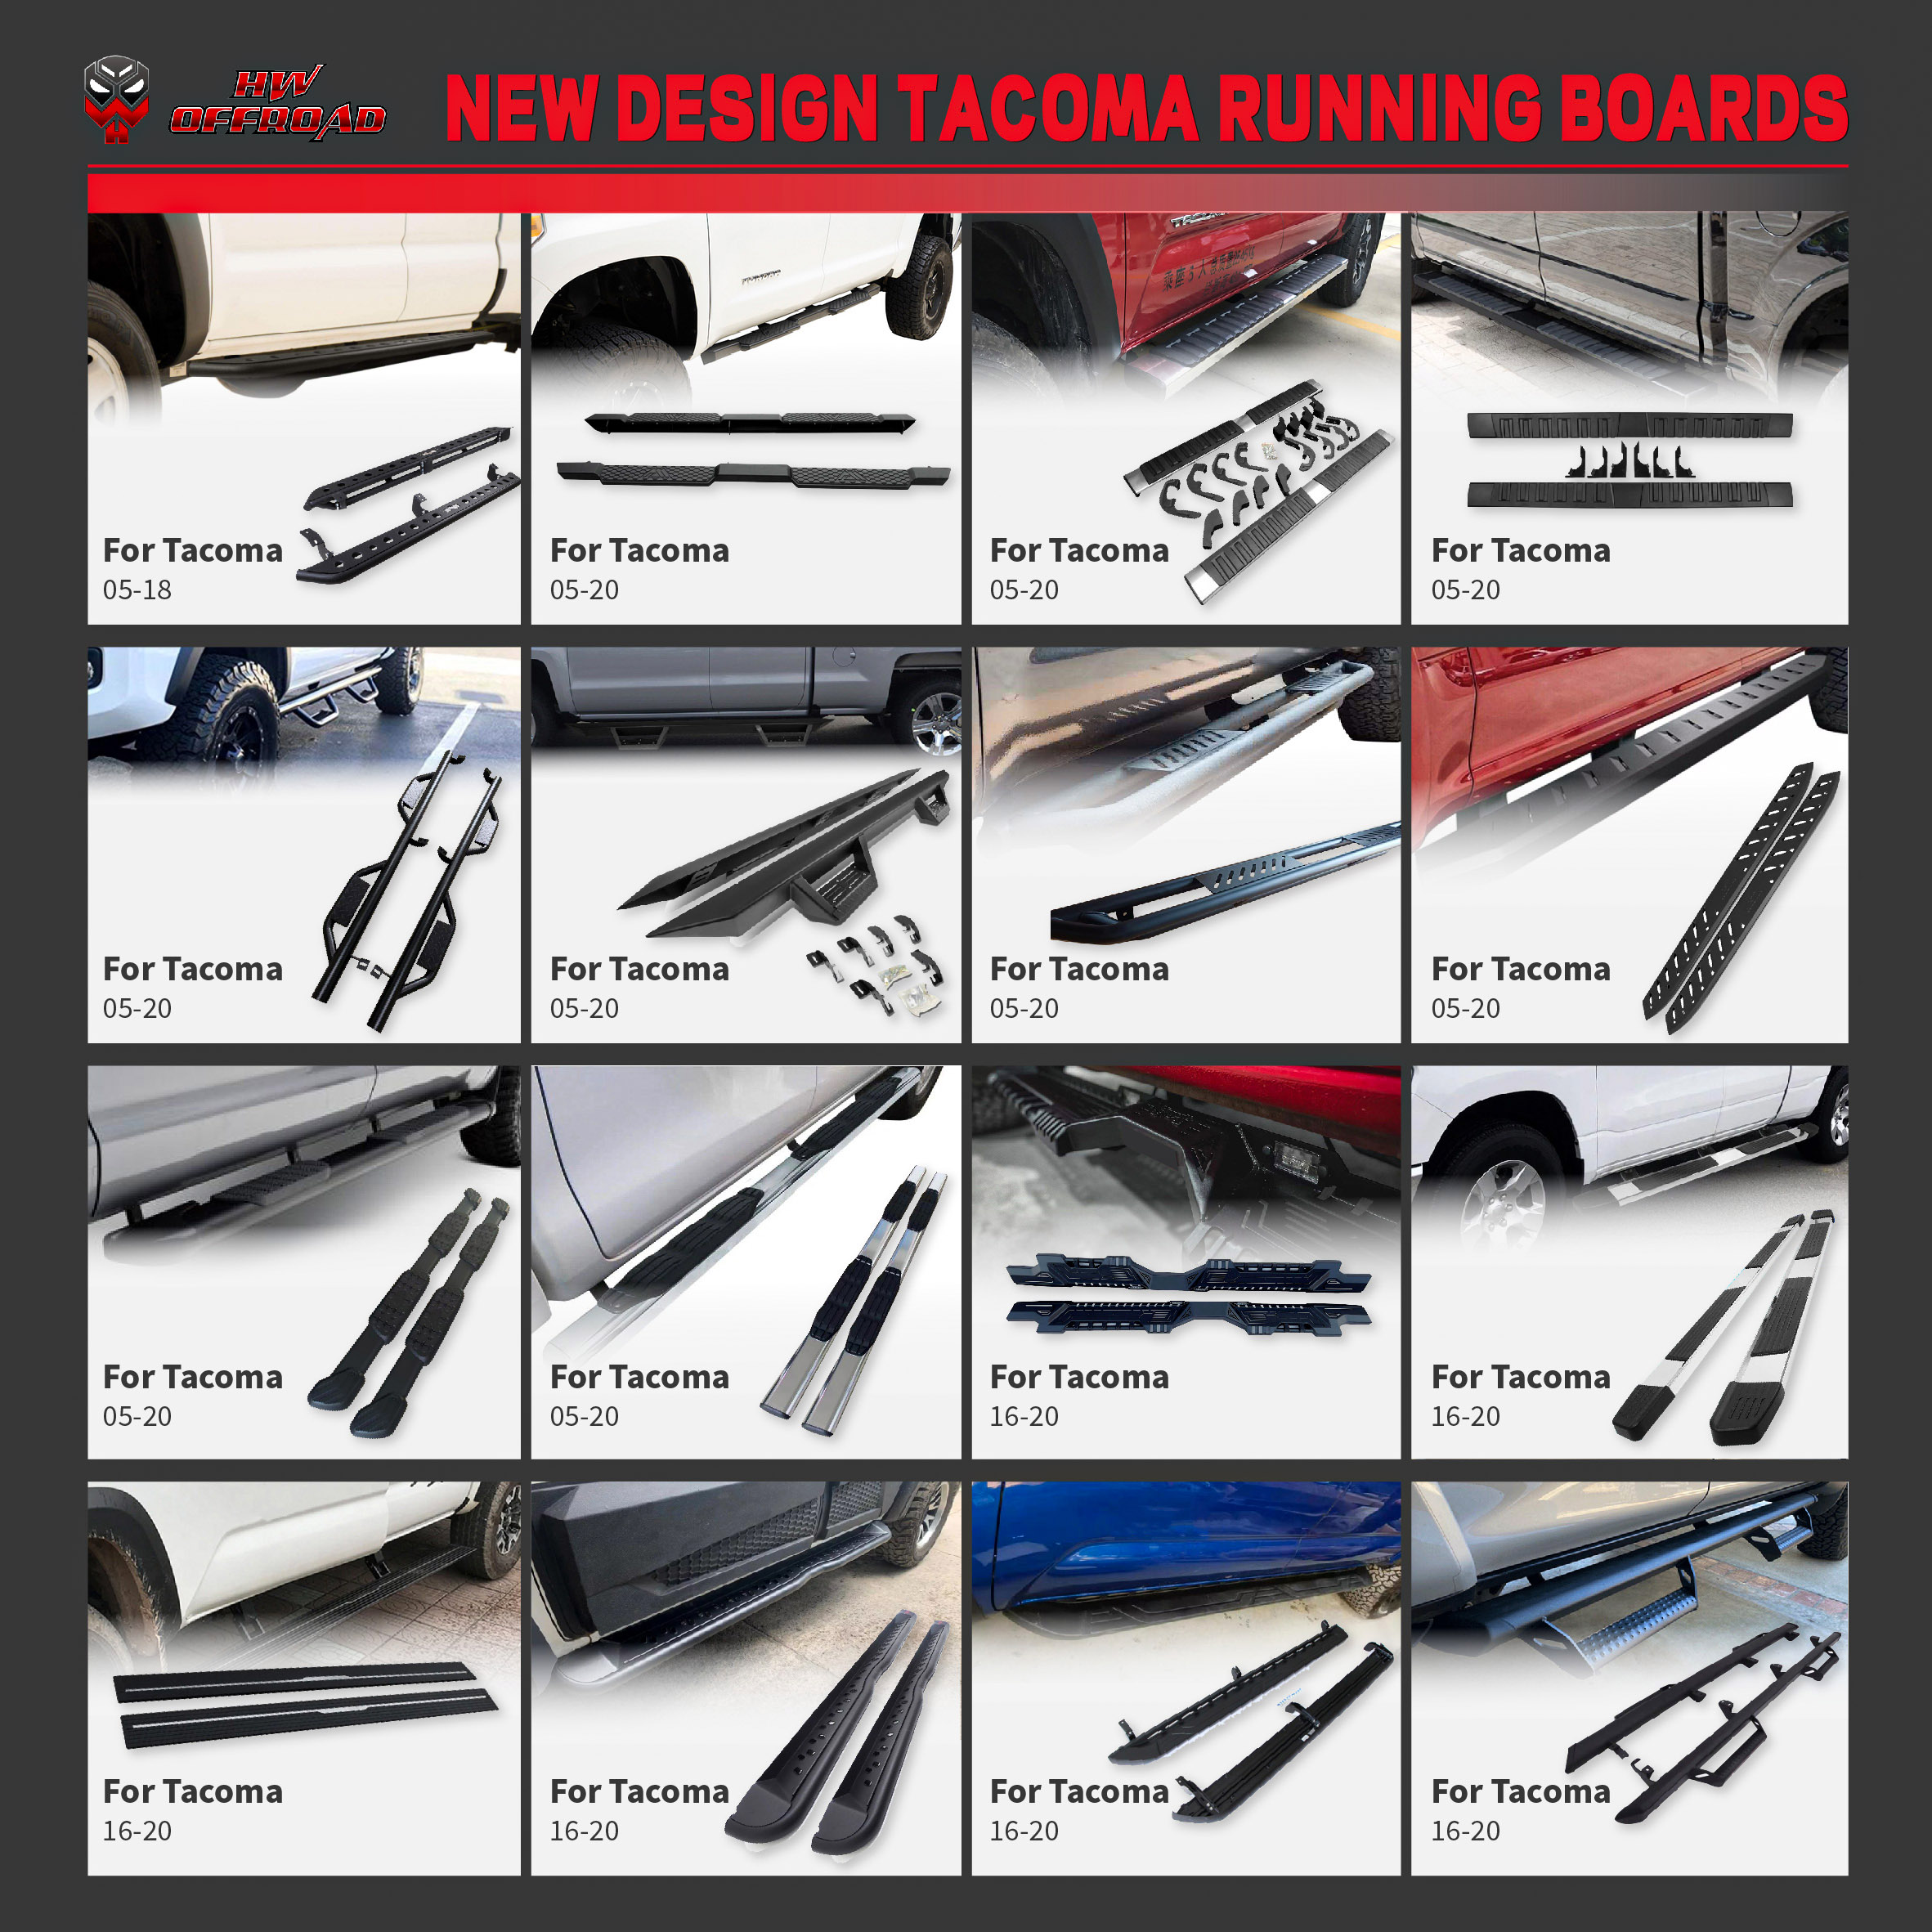 NEW Design Running boards For Tacoma 05-18,05-20,16-20